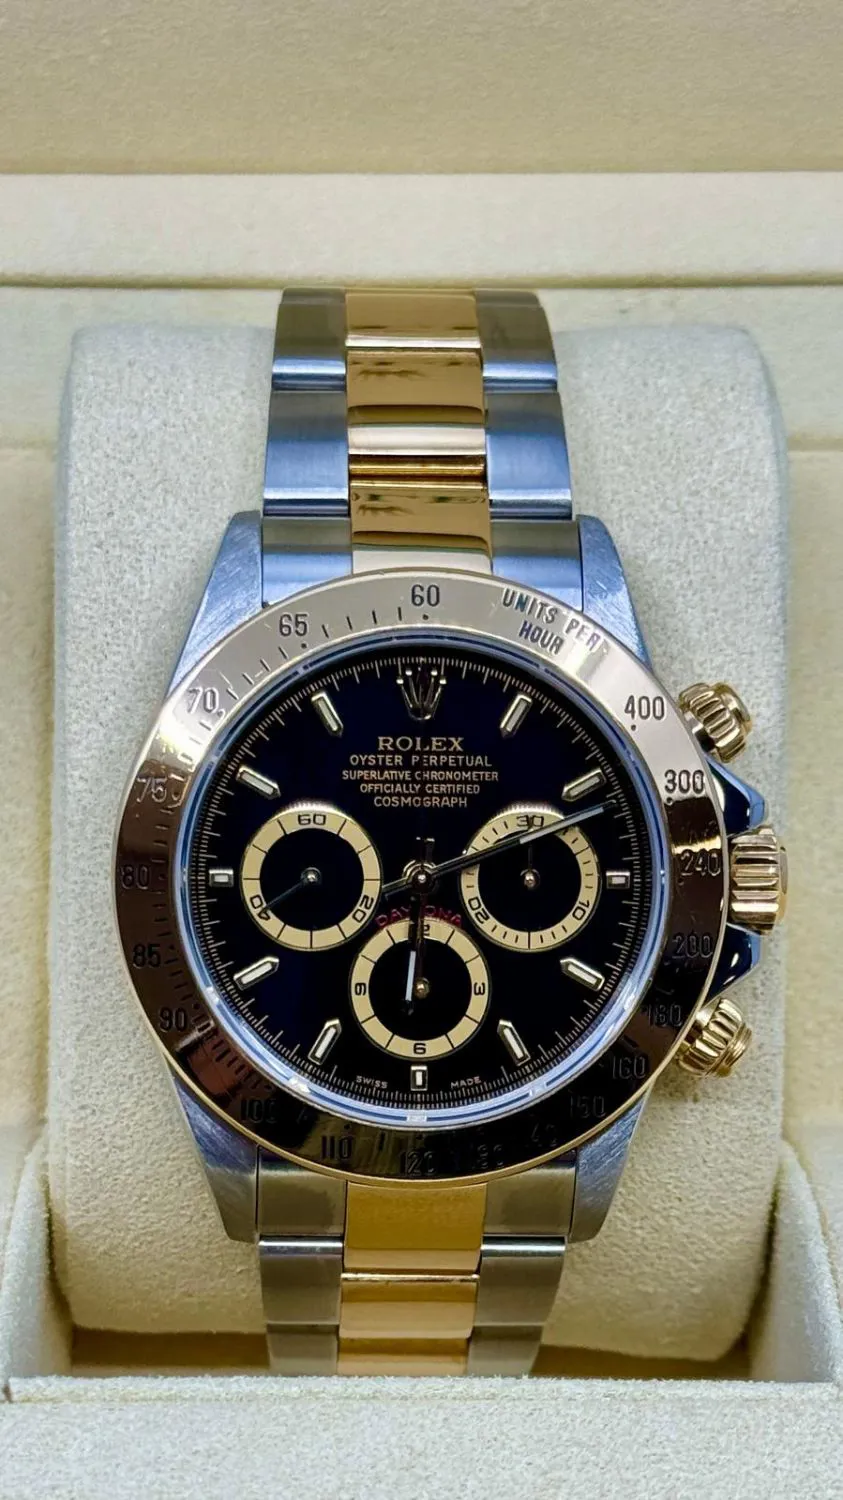 Rolex Daytona 16523 40mm Yellow gold and stainless steel Black